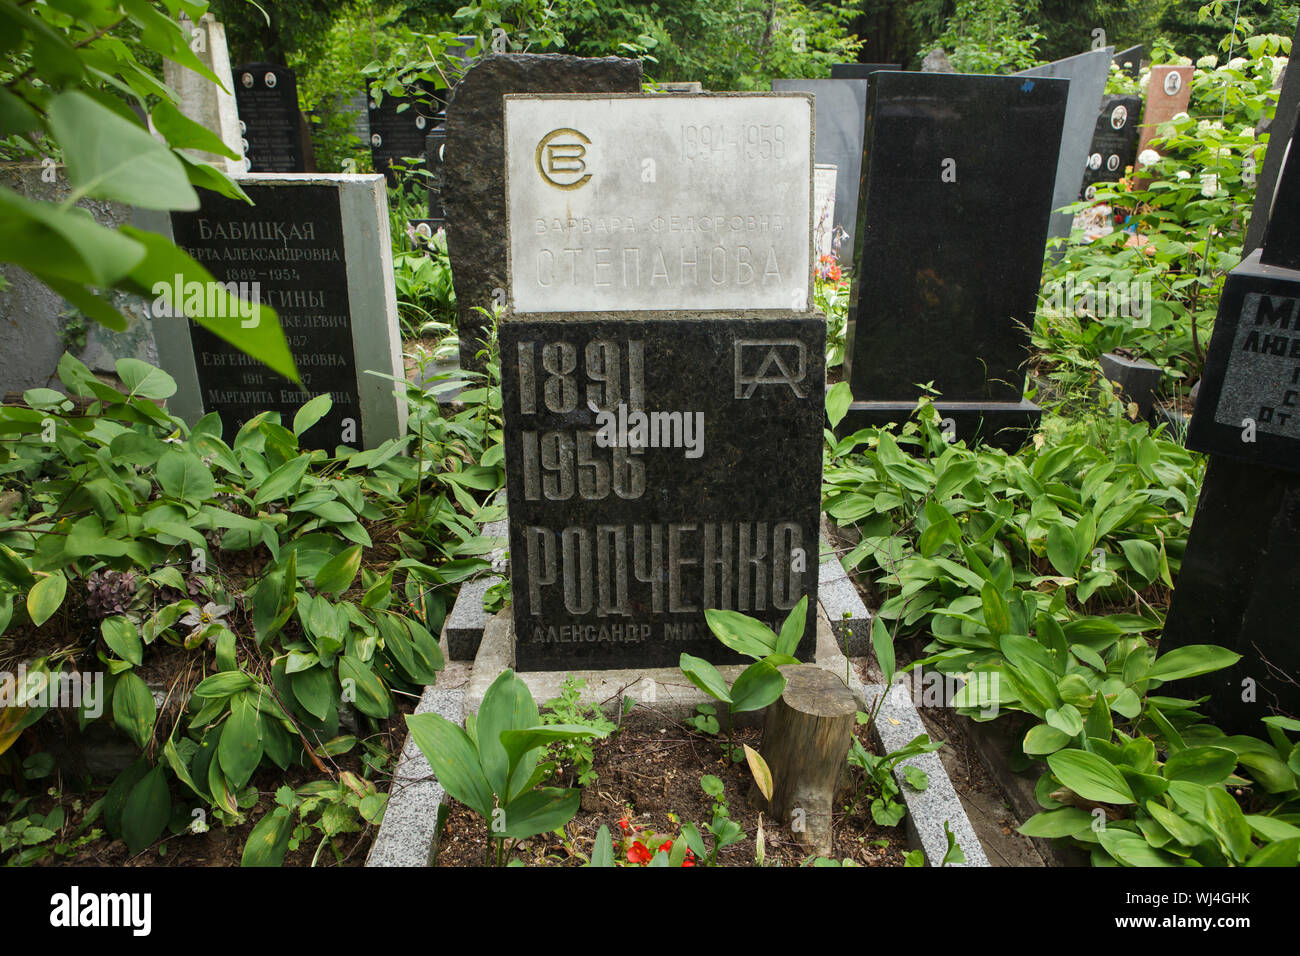 Grave of Russian avant-garde artists Alexander Rodchenko (1891 - 1956) and Varvara Stepanova (1894 - 1958) at the Donskoye Cemetery in Moscow, Russia. Stock Photo